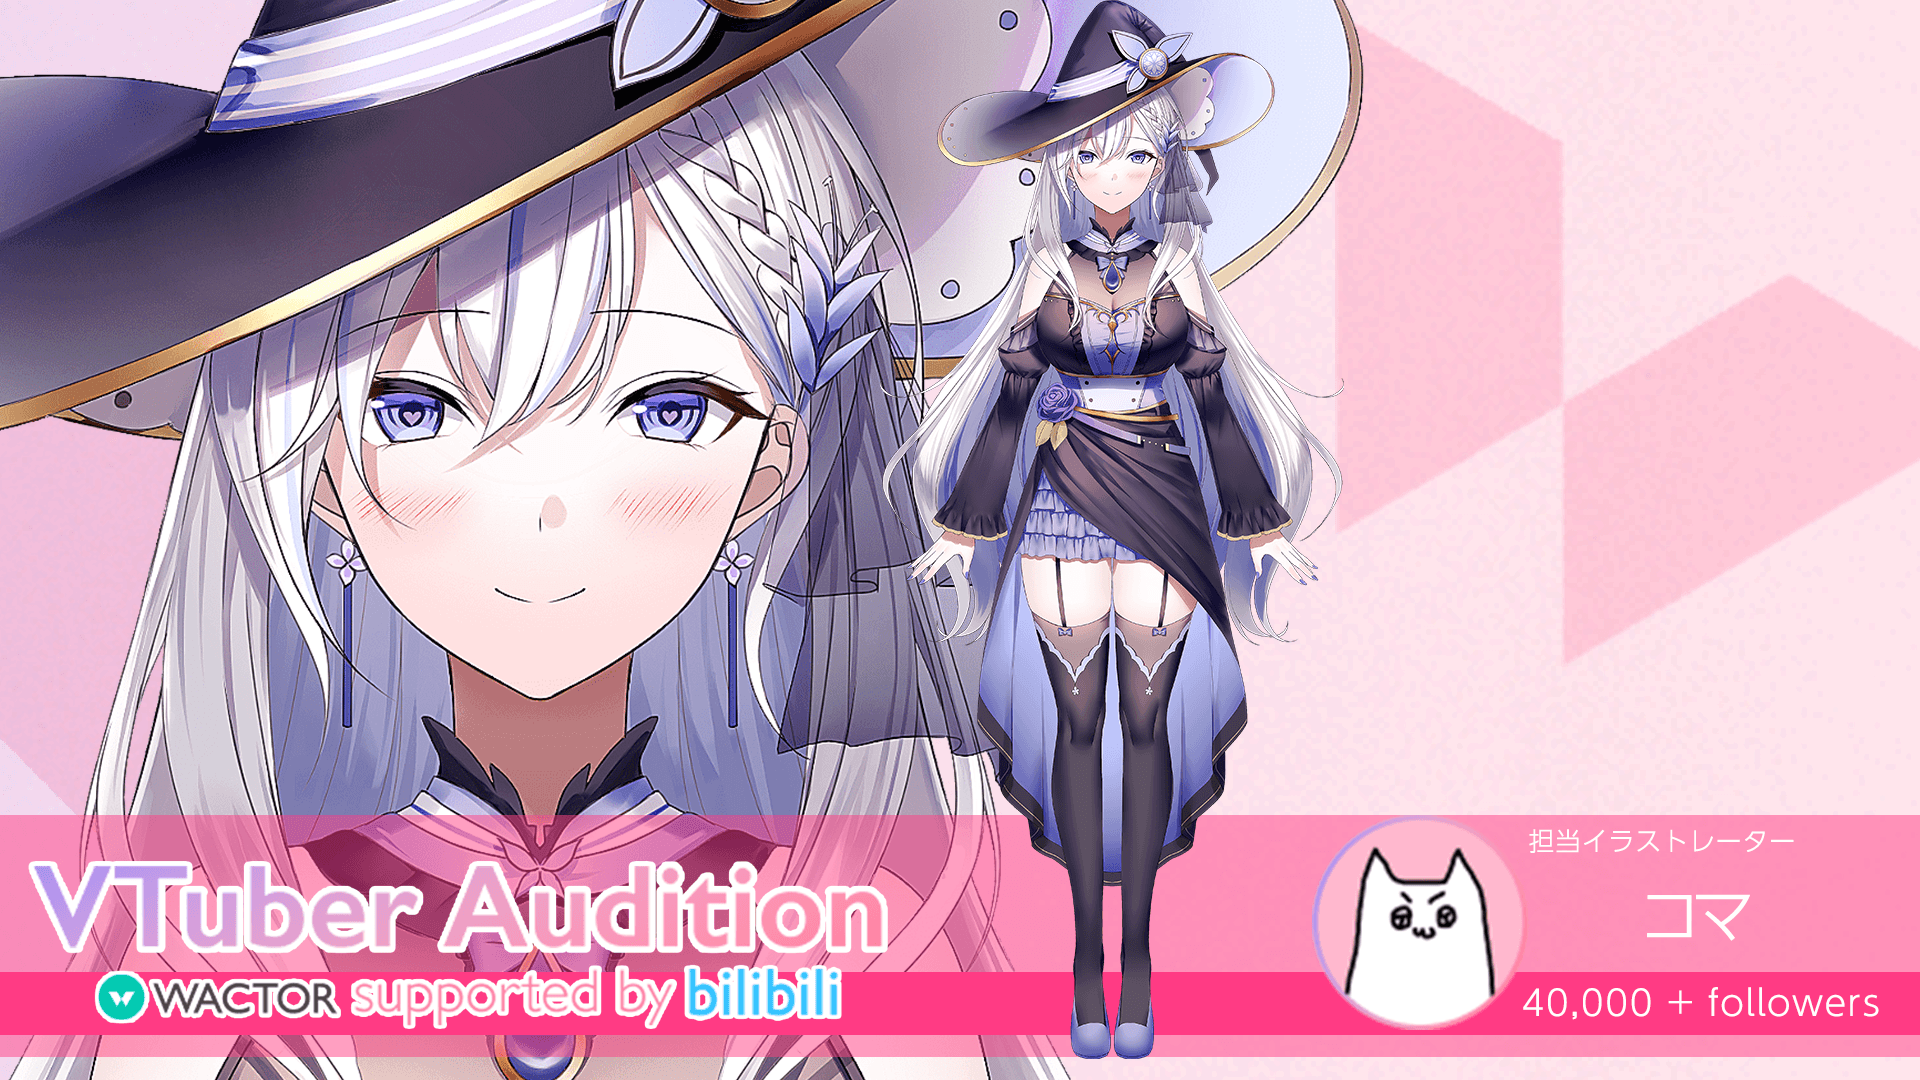 wactor-vtuber-audition-supported-by-bilibili-7